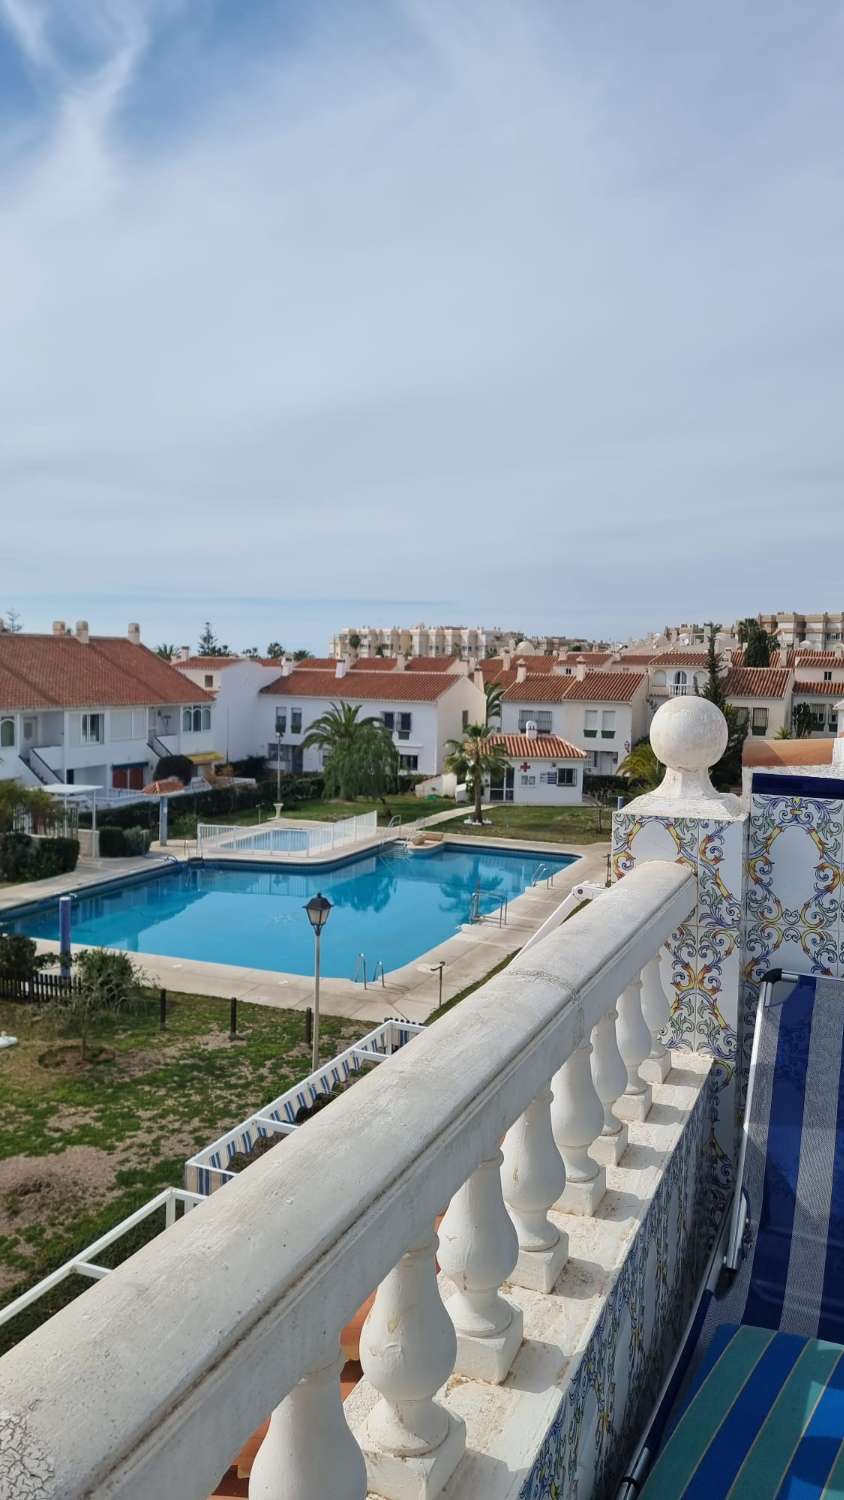 Spacious and practical with 3 bedrooms 2 bathrooms in Pueblo ANdaluz